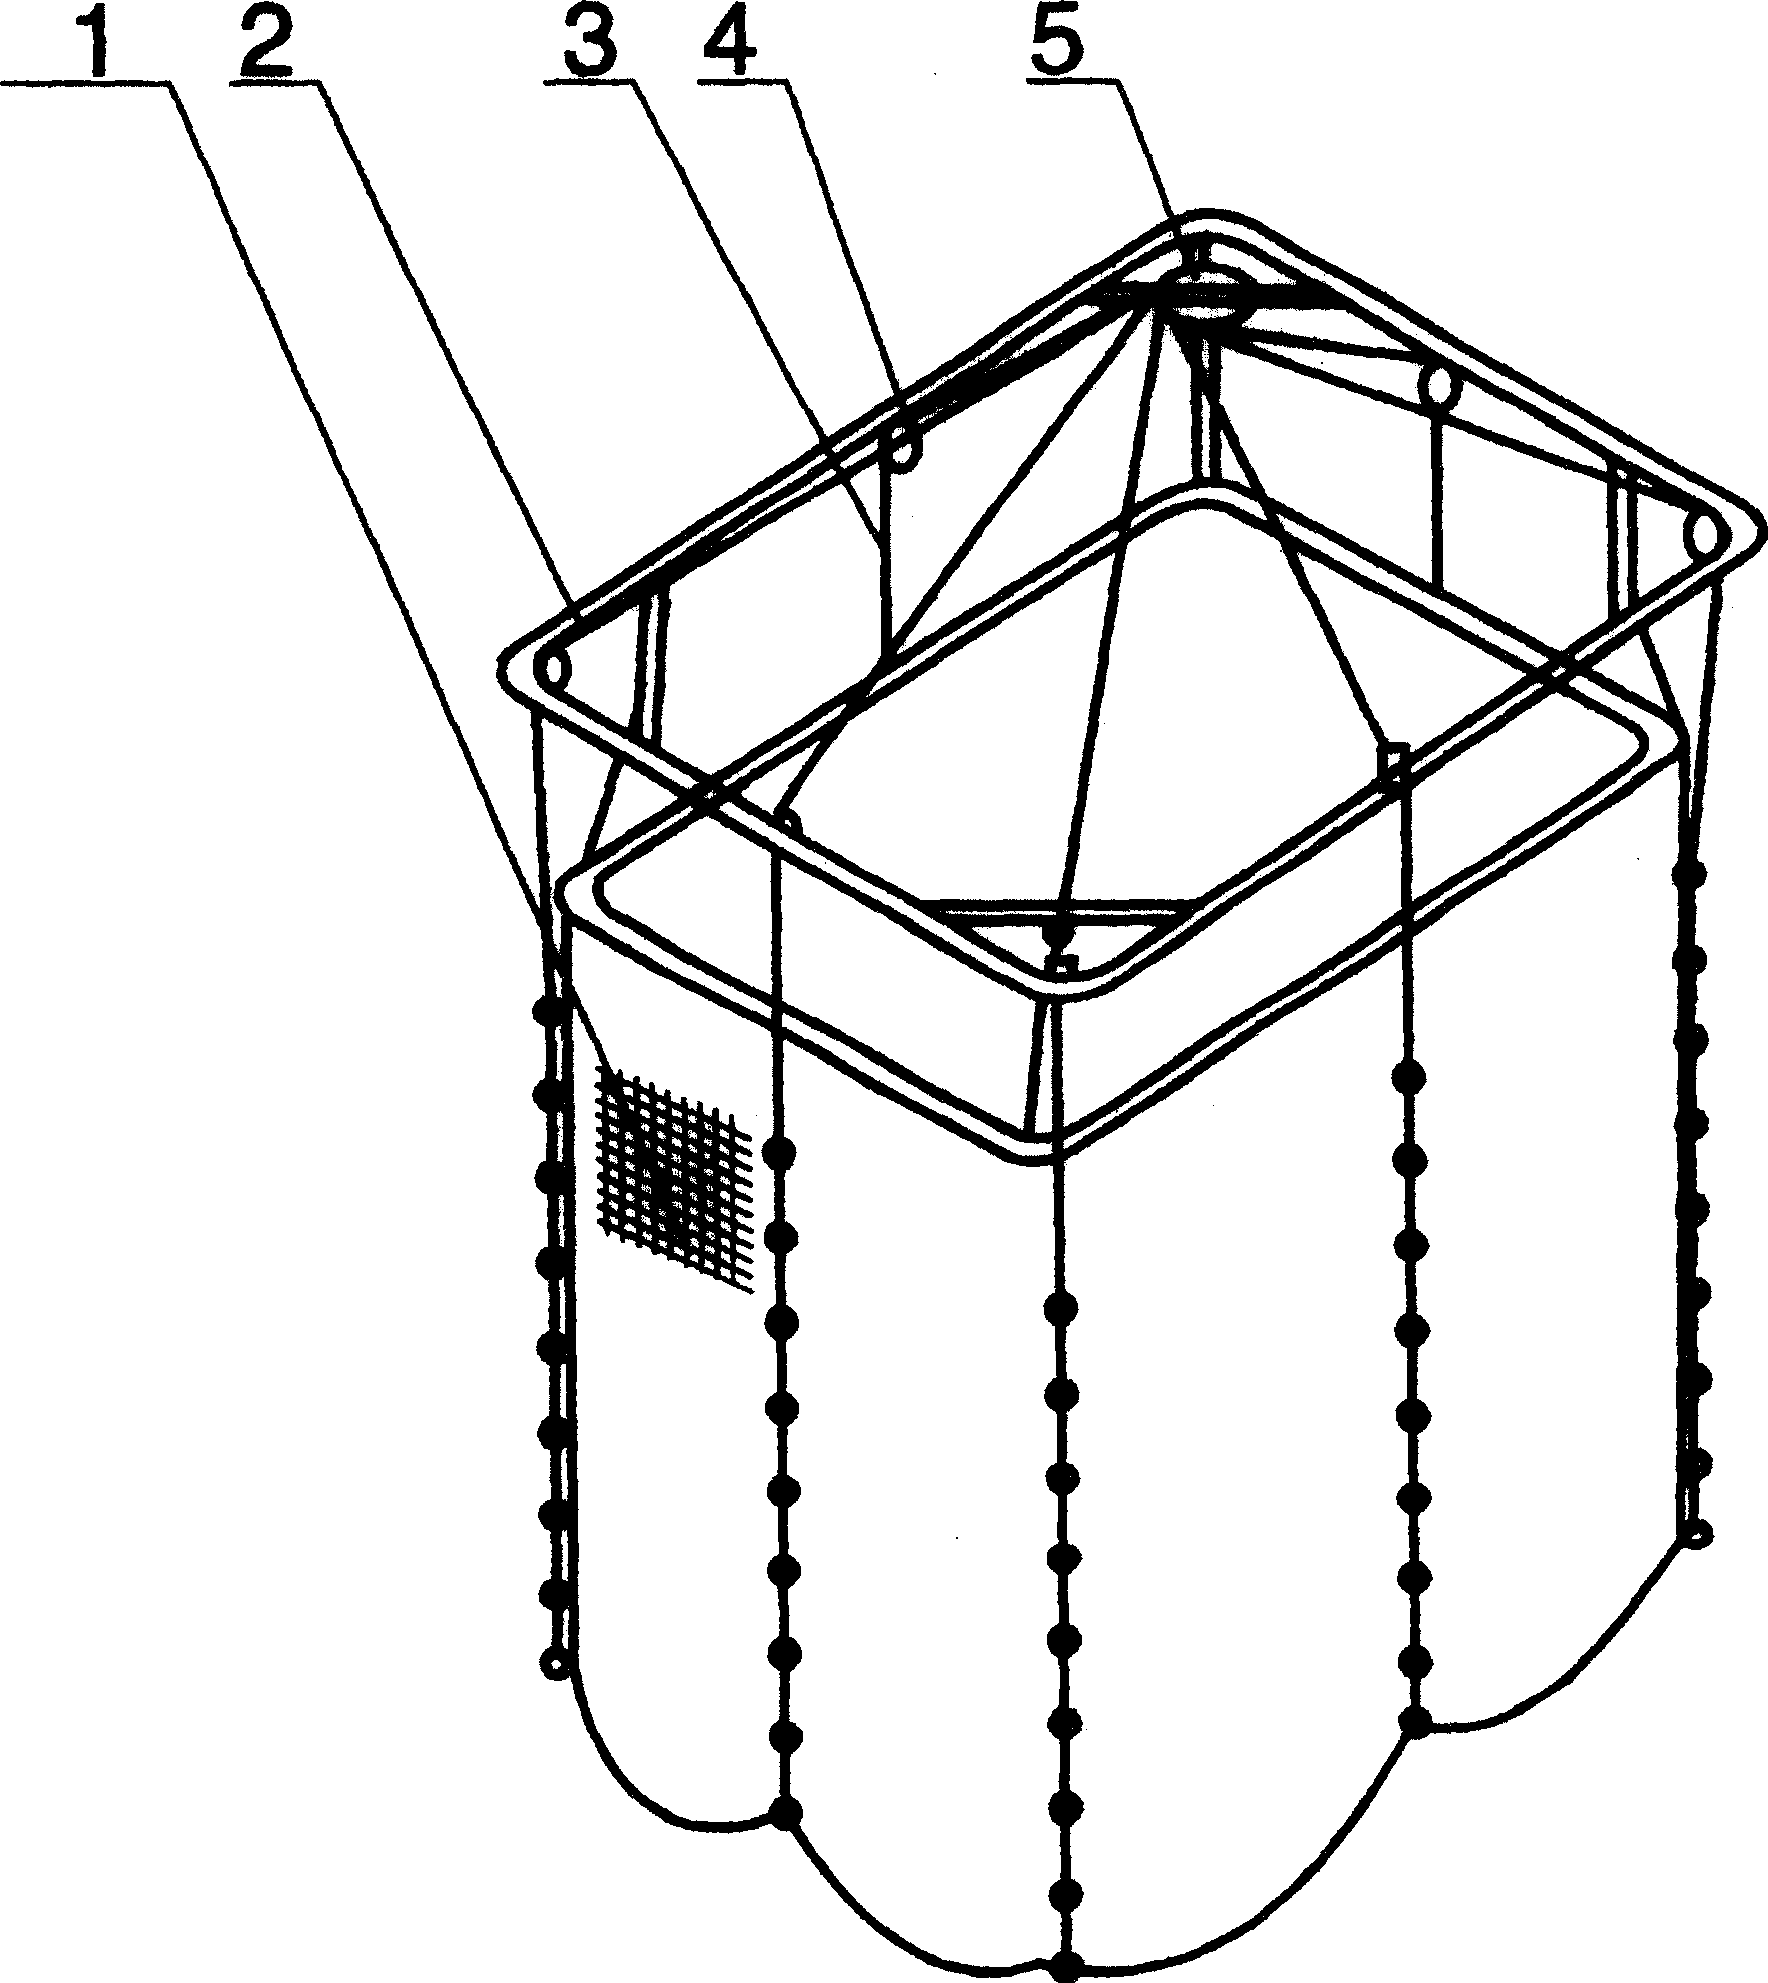 Mosquito net elevator with clutch